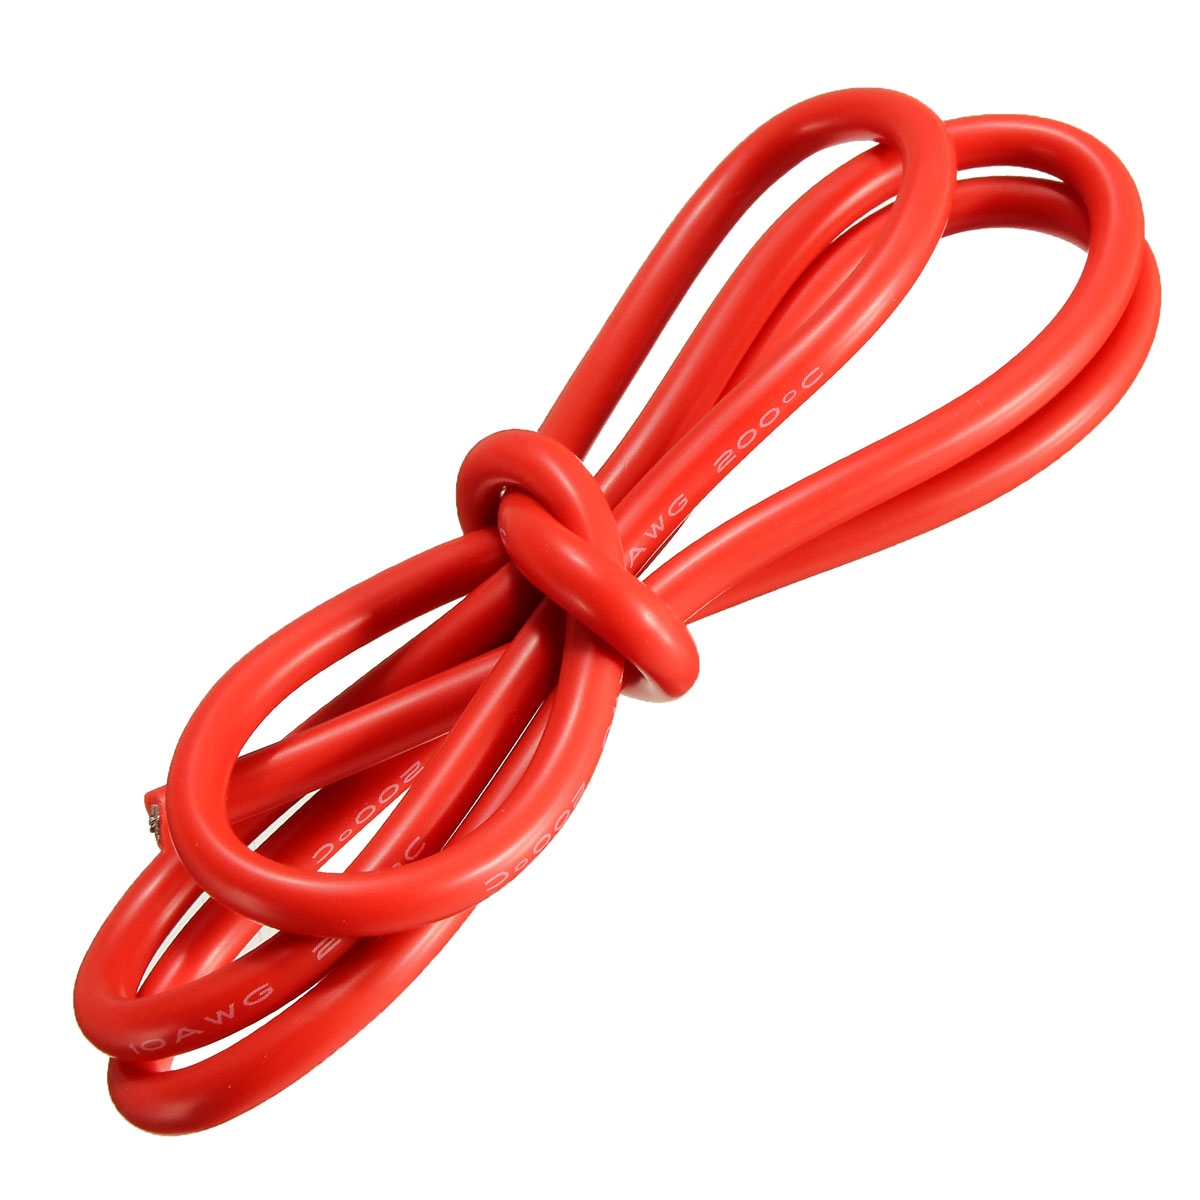 1-Meter-Red-Silicone-Wire-Cable-10121416182022AWG-Flexible-Cable-1035777